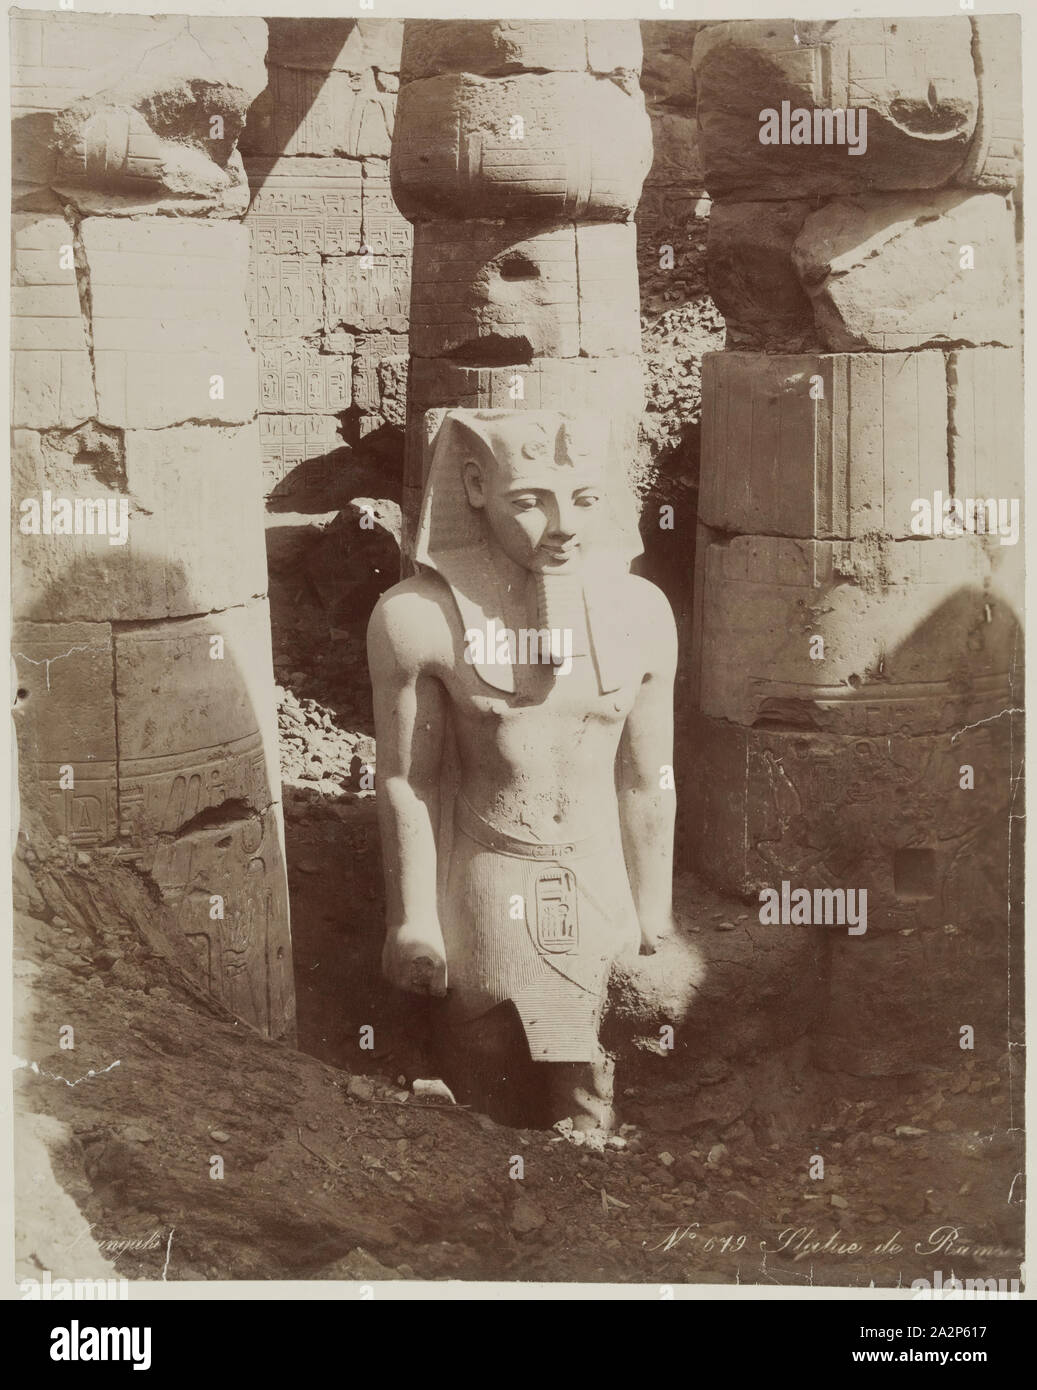 Zangaki, Greek, active 1860-1889, Colossal Statue of Ramesses II in the First Court of the Temple at Luxor, 19th century, albumen print Stock Photo